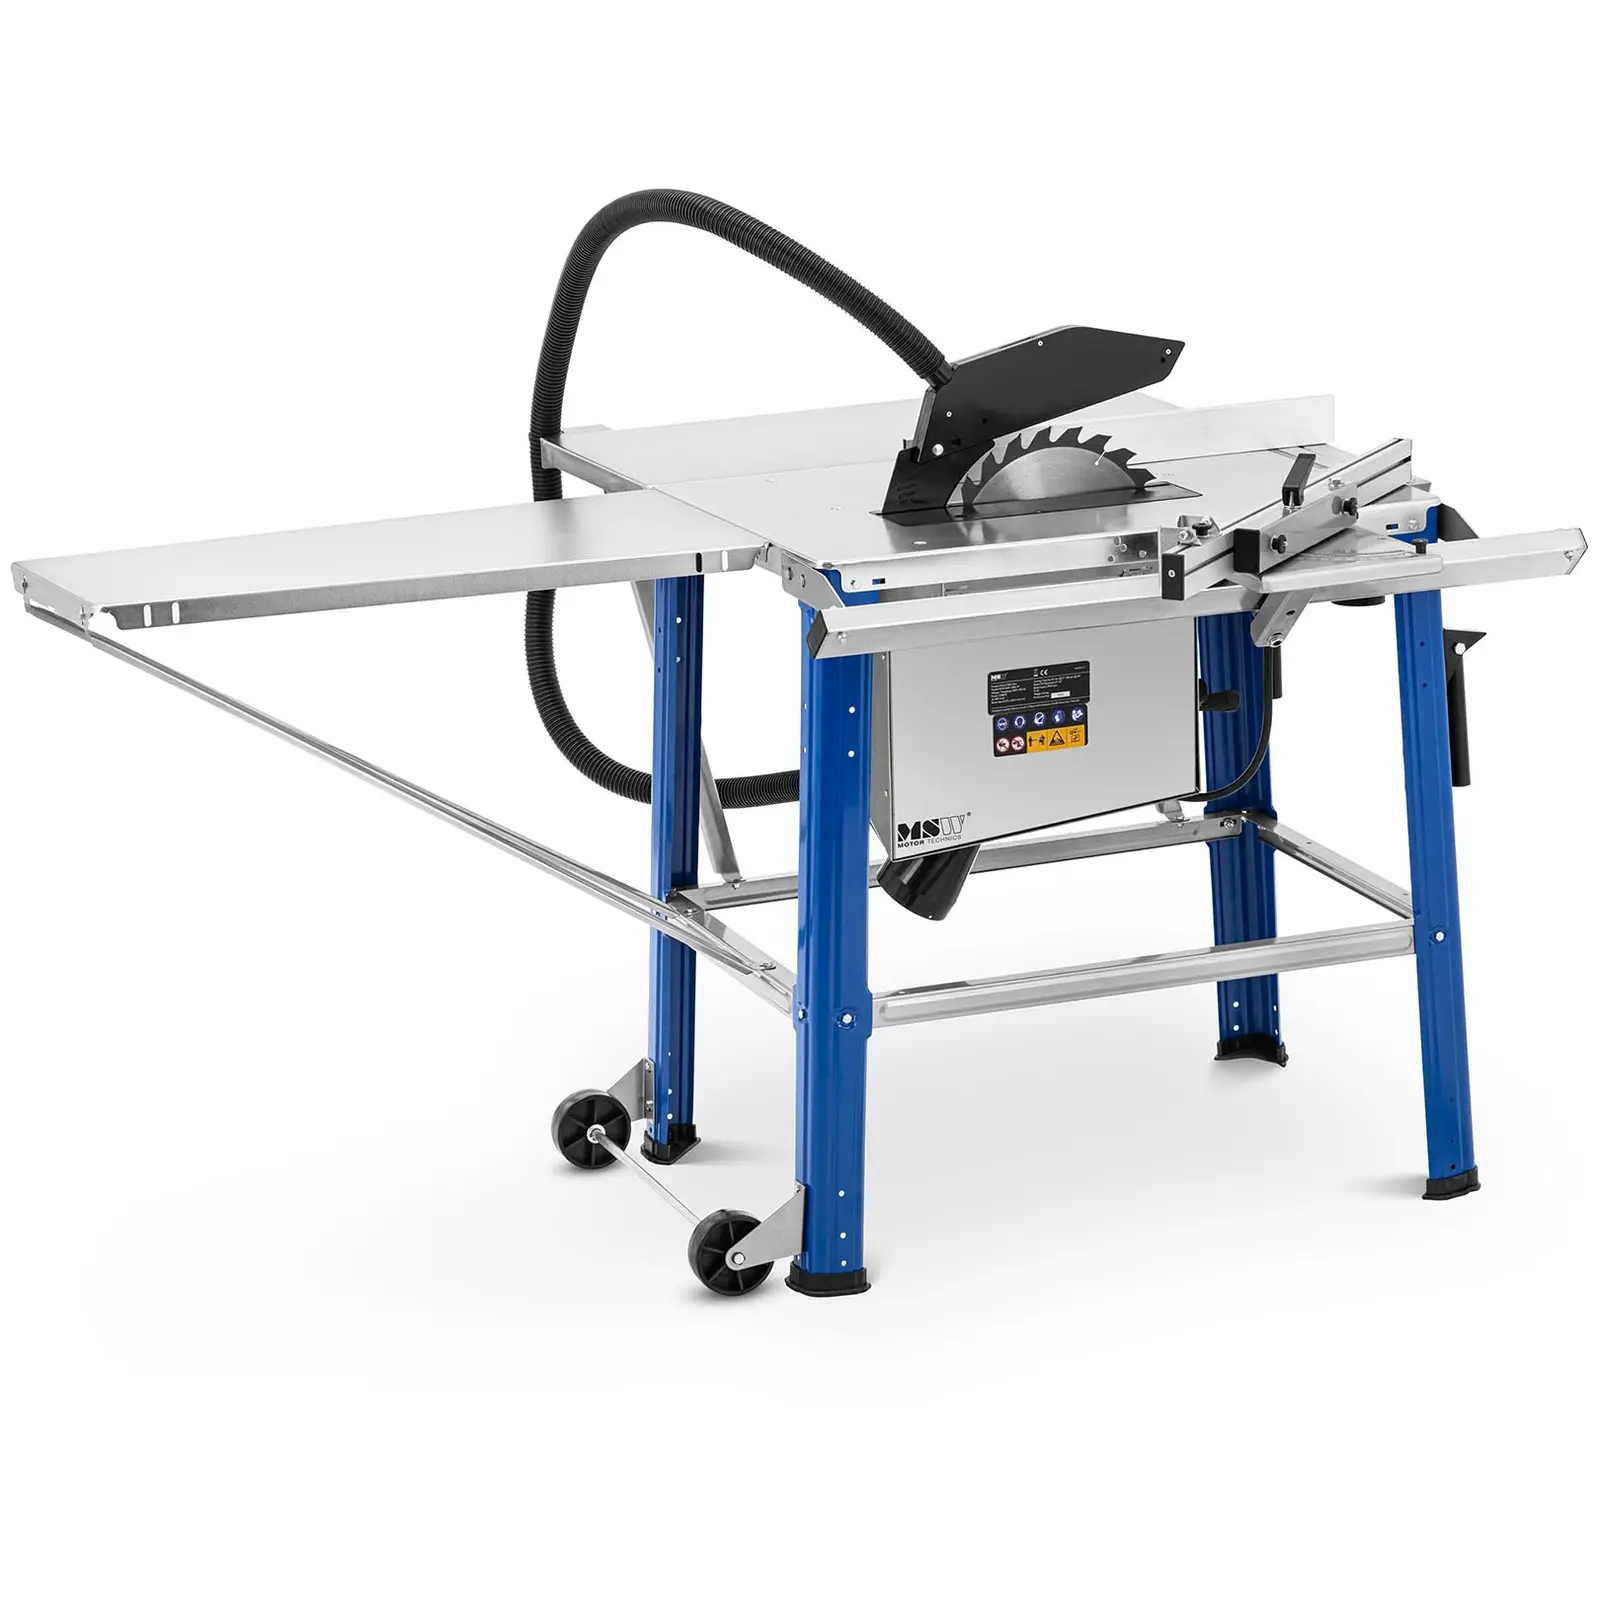 Table Saw - 2200 W - 2991 rpm - table top extendable